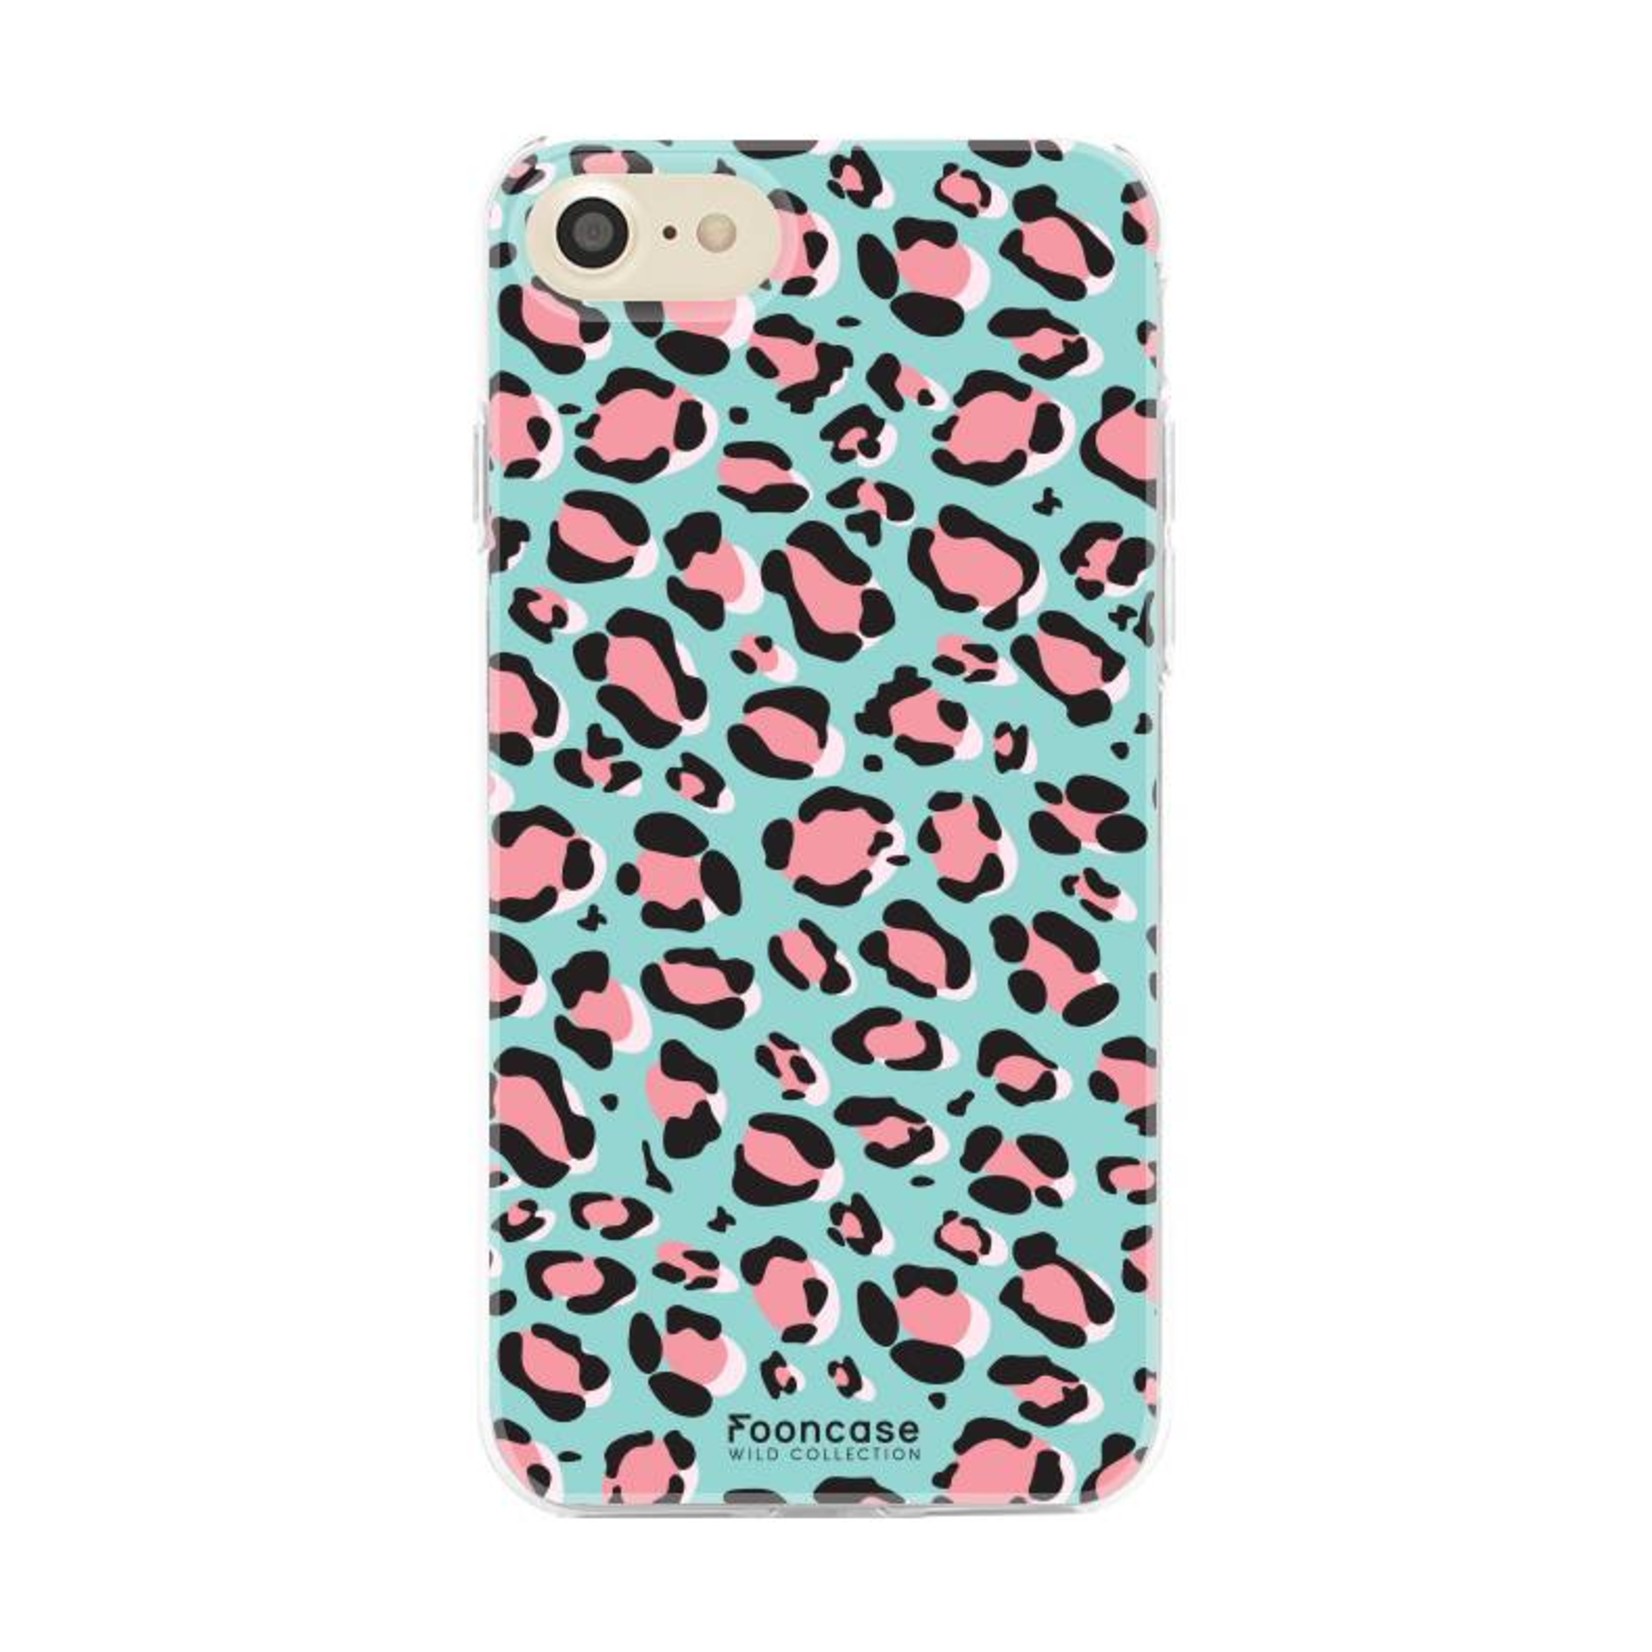 FOONCASE iPhone SE (2020) Cover - WILD COLLECTION / Blu